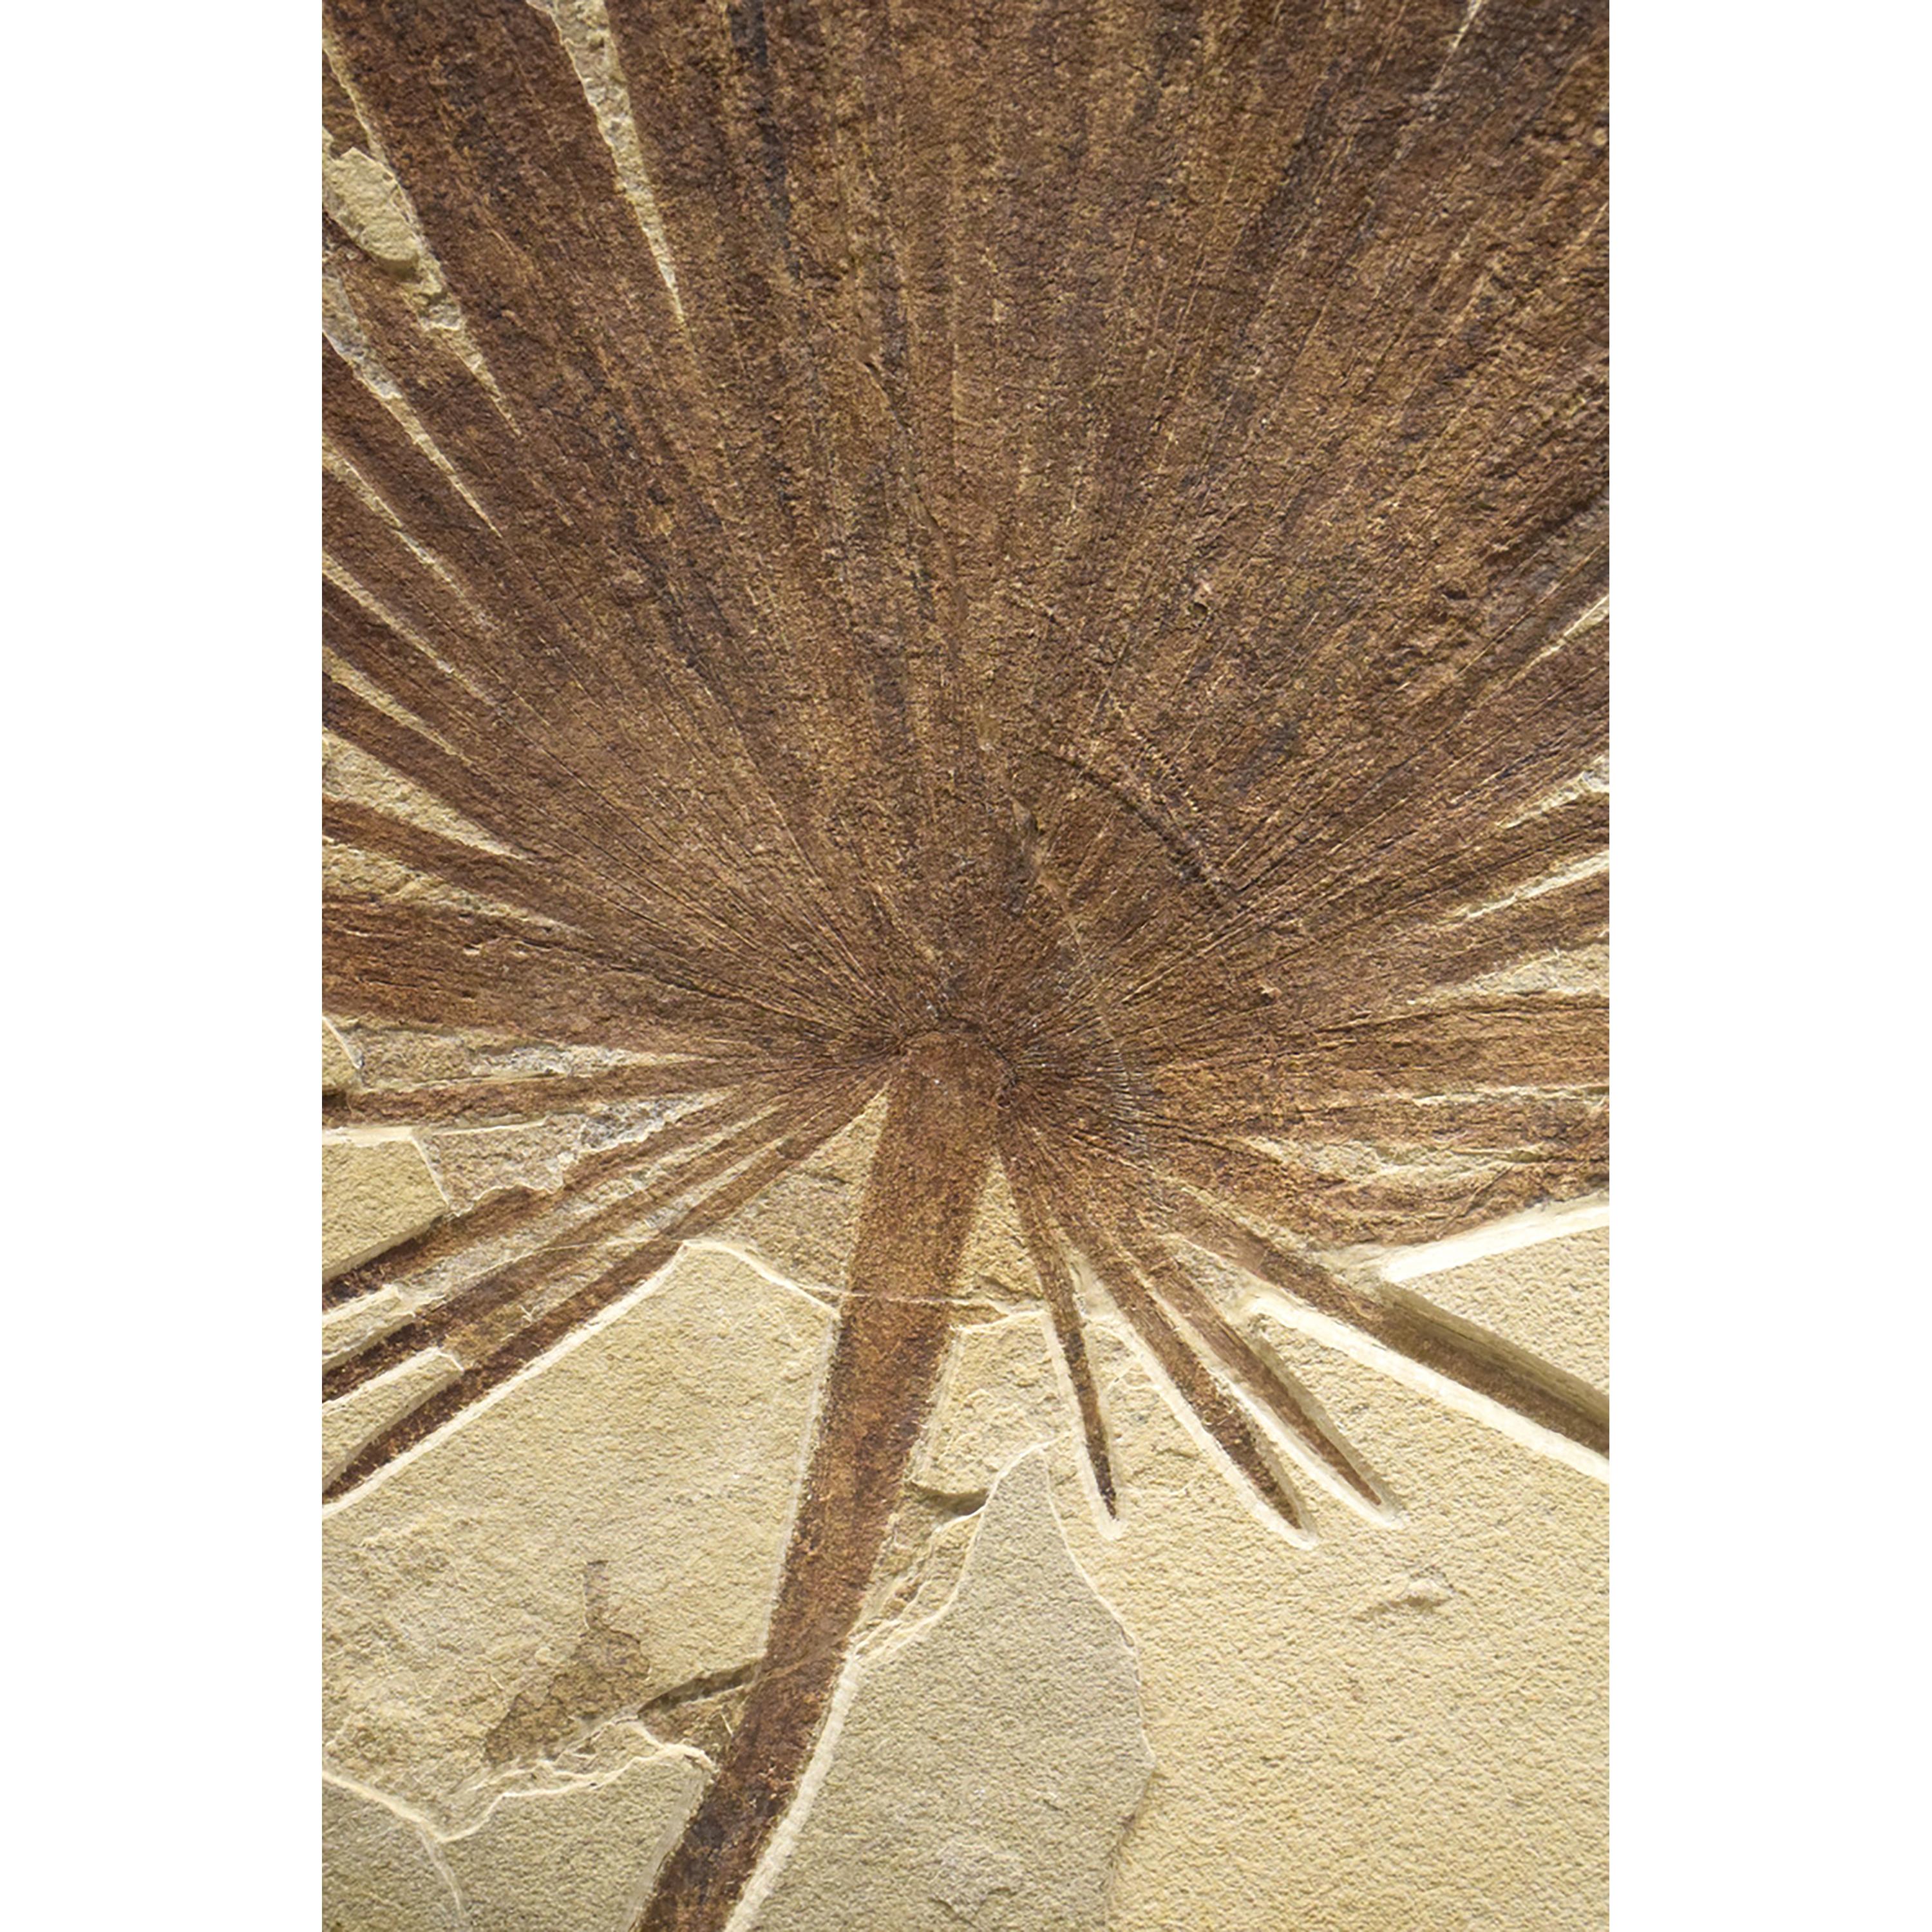 American 50 Million Year Old Fossil Palm & Fish Triptych, Green River Formation, Wyoming